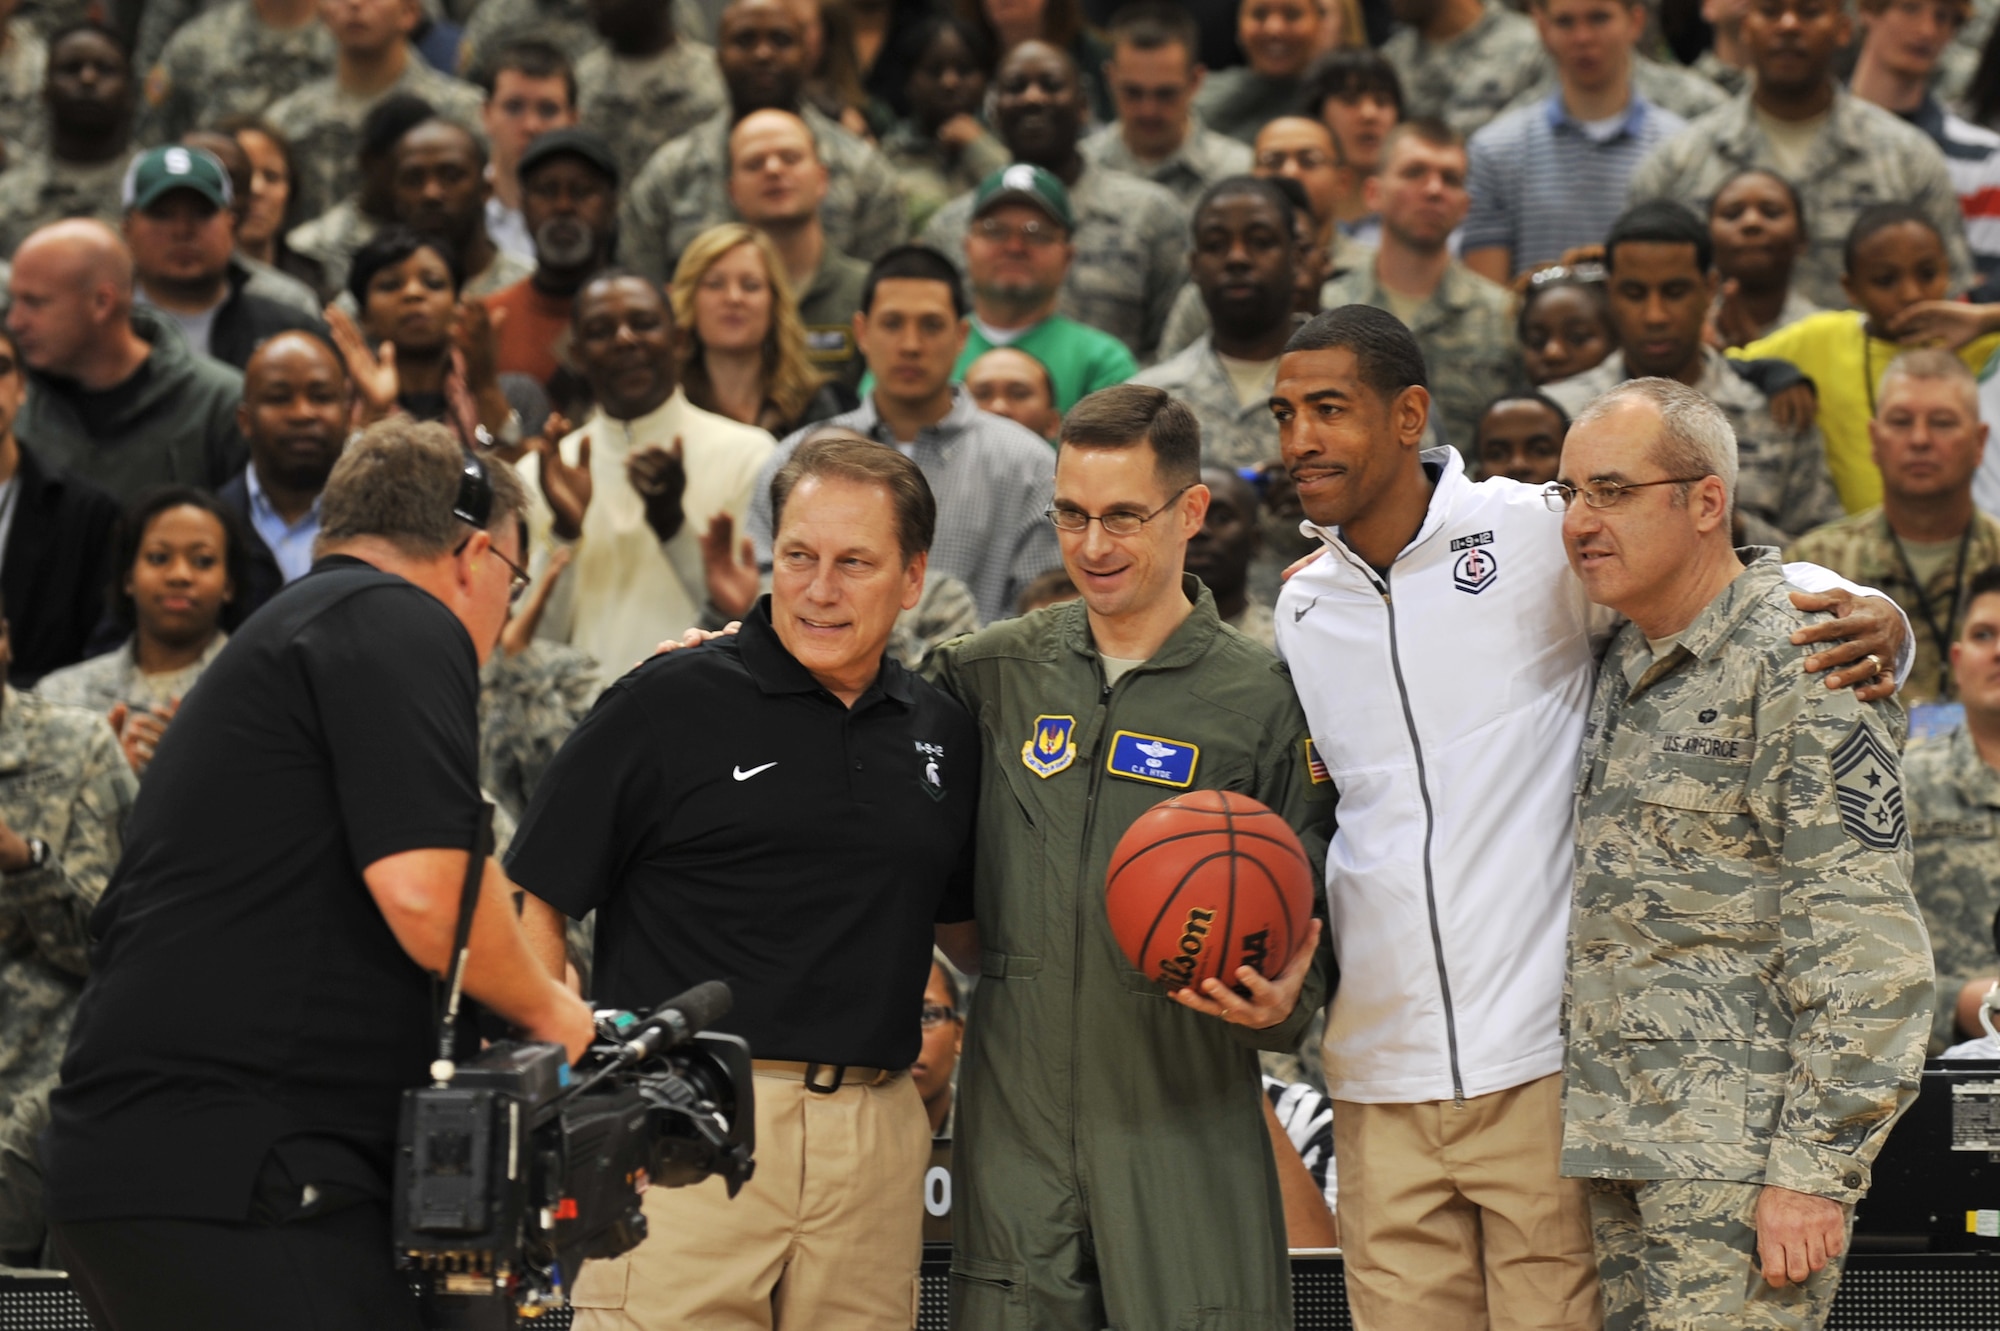 Brig. Gen. C.K. Hyde, 86th Airlift Wing commander, along with Chief Master Sgt. James Morris, 86th Airlift Wing command chief, presents head coaches Kevin Ollie, University of Connecticut, and Tom Izzo, Michigan State, with the game ball during the 2012 Armed Forces Classic on Ramstein Air Base, Germany, Nov. 10, 2012. The match-up between MSU and UCONN is part of ESPN's Veteran's week initiative to honor the men and women who have served and are still serving in the U.S. military. (U.S. Air Force photo/Senior Airman Caitlin O’Neil-McKeown)